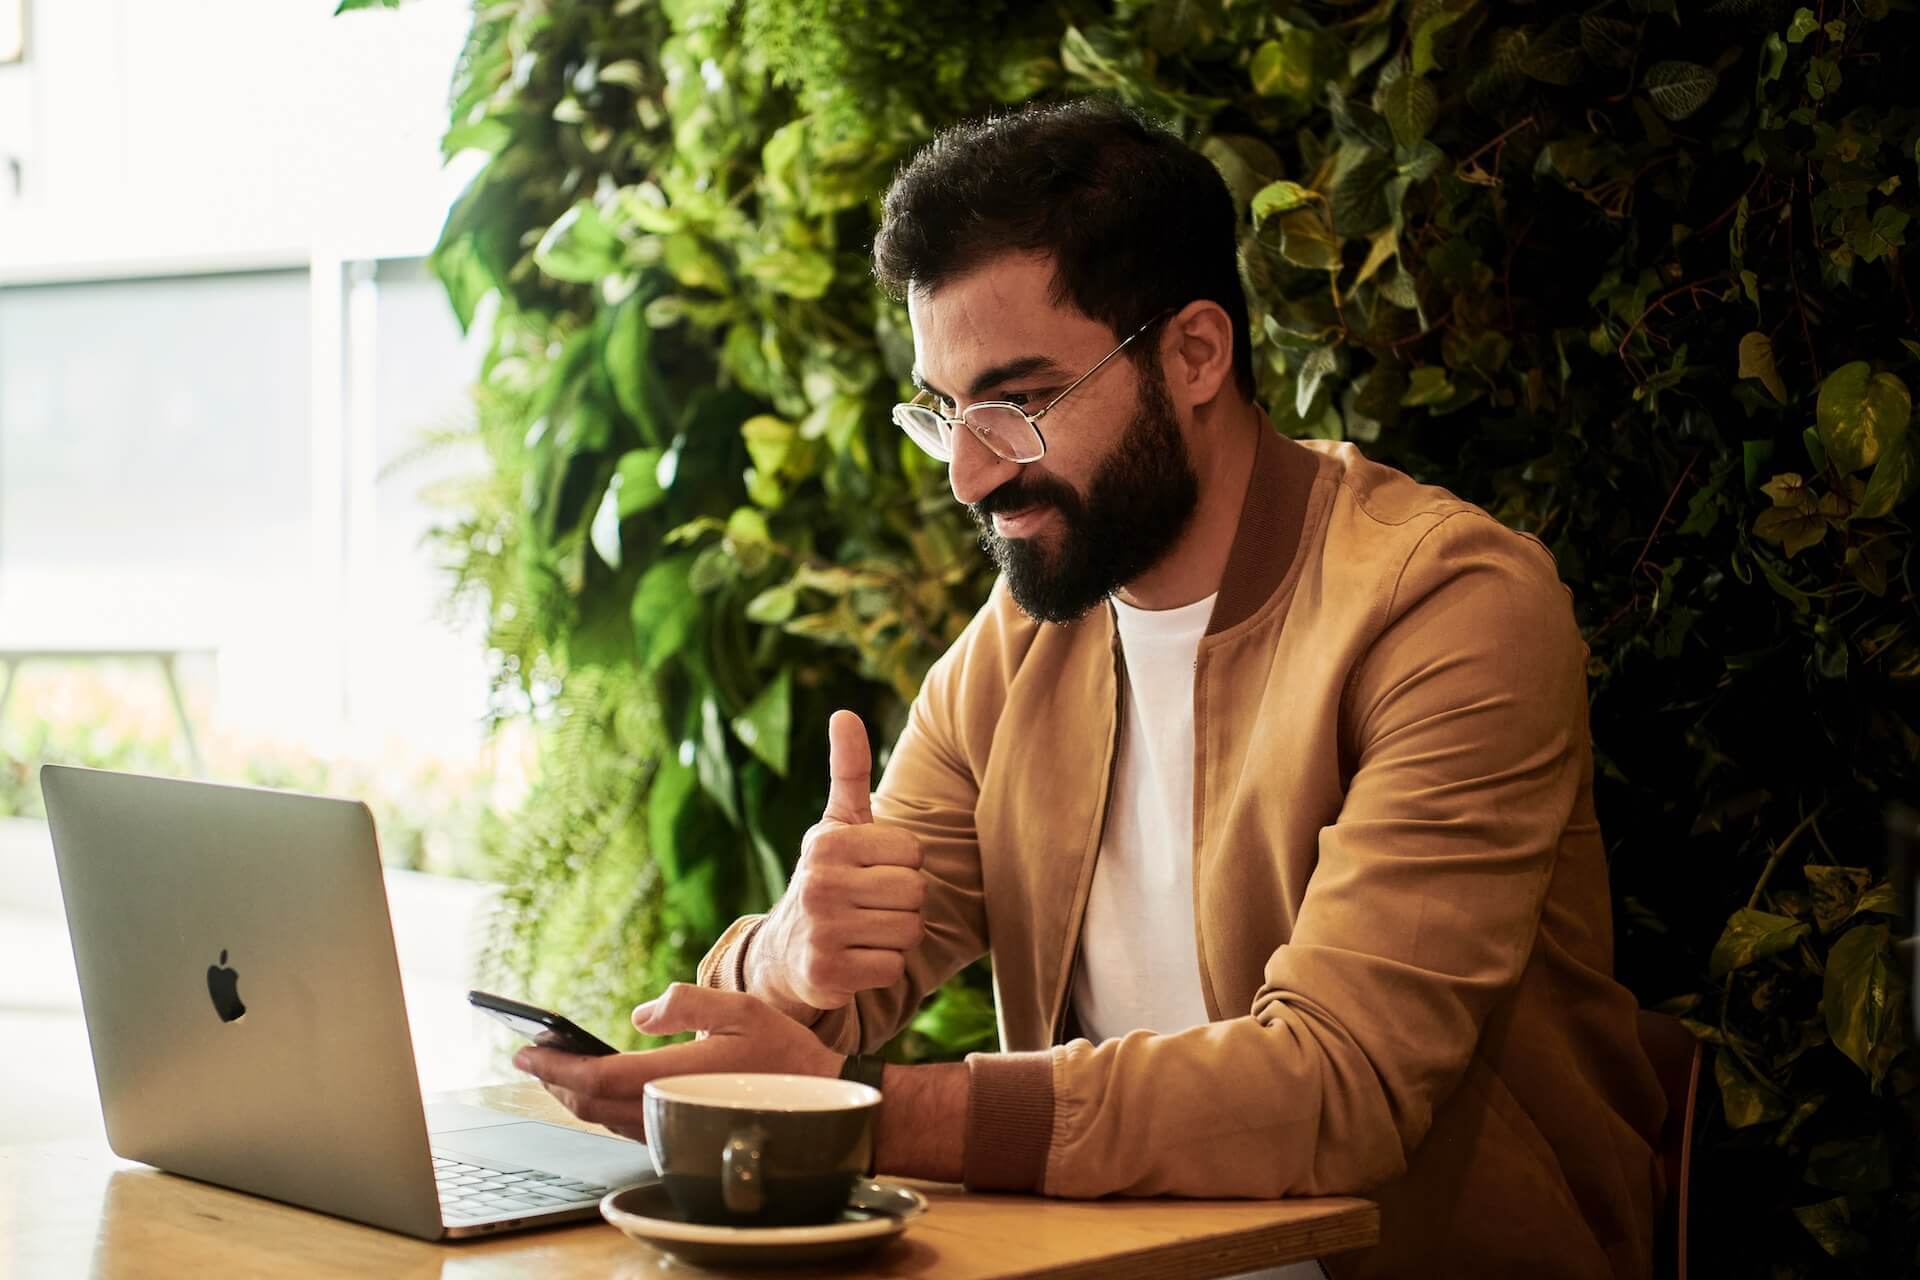  Man looking at the laptop and holding a thumb up, coffee next to him 